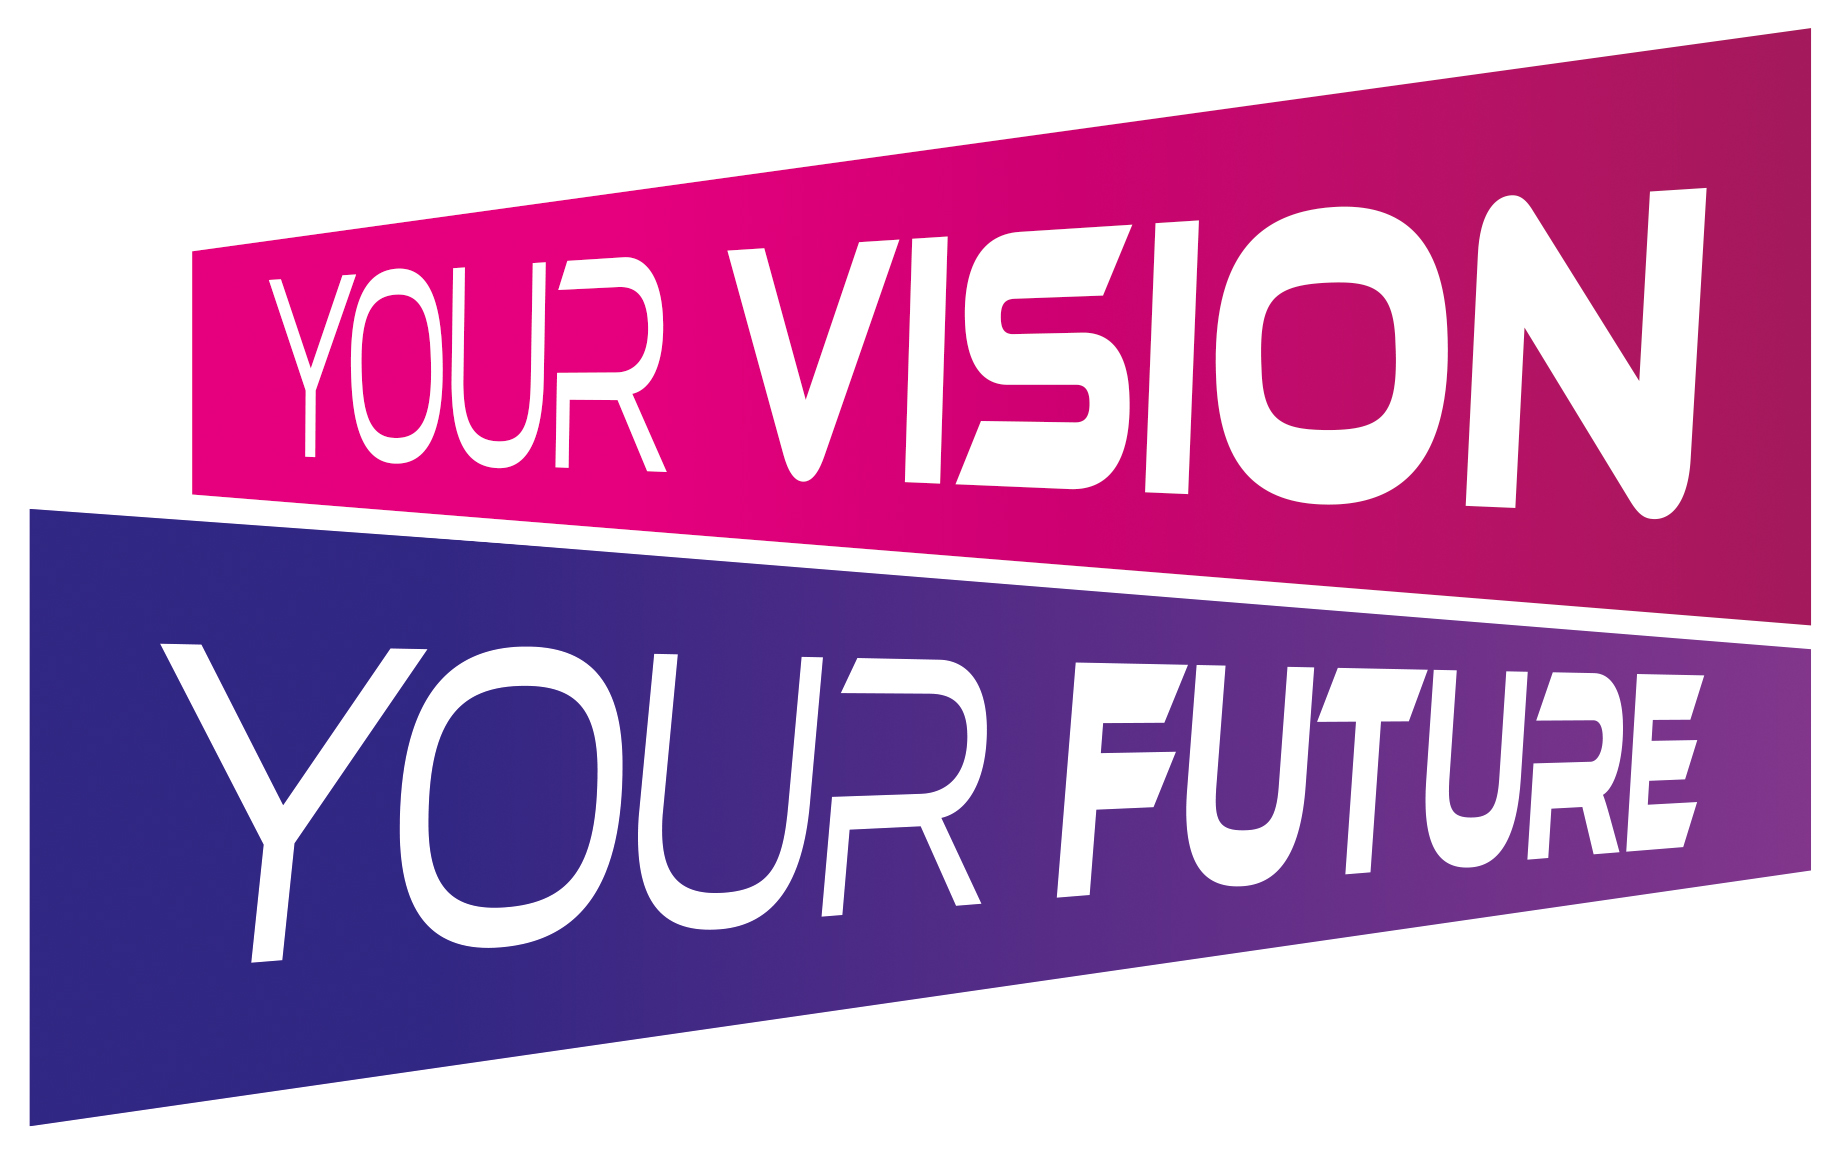 Your vision your future NO STRAP